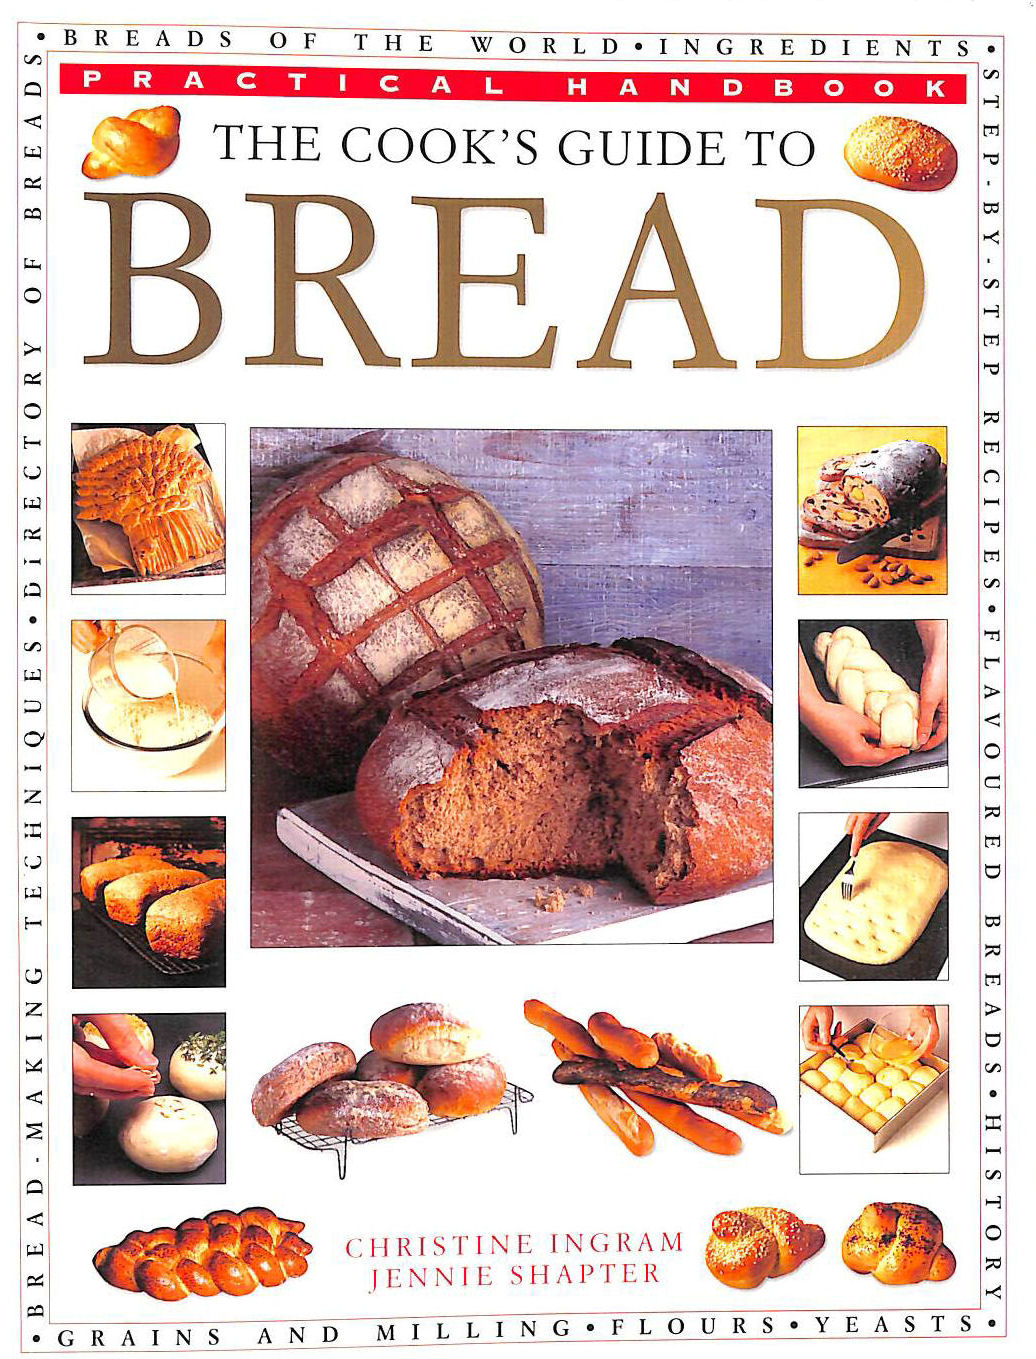 INGRAM CHRISTINE, SHAPTER JENNIE - The Cook's Guide to Bread. Practical Handbook